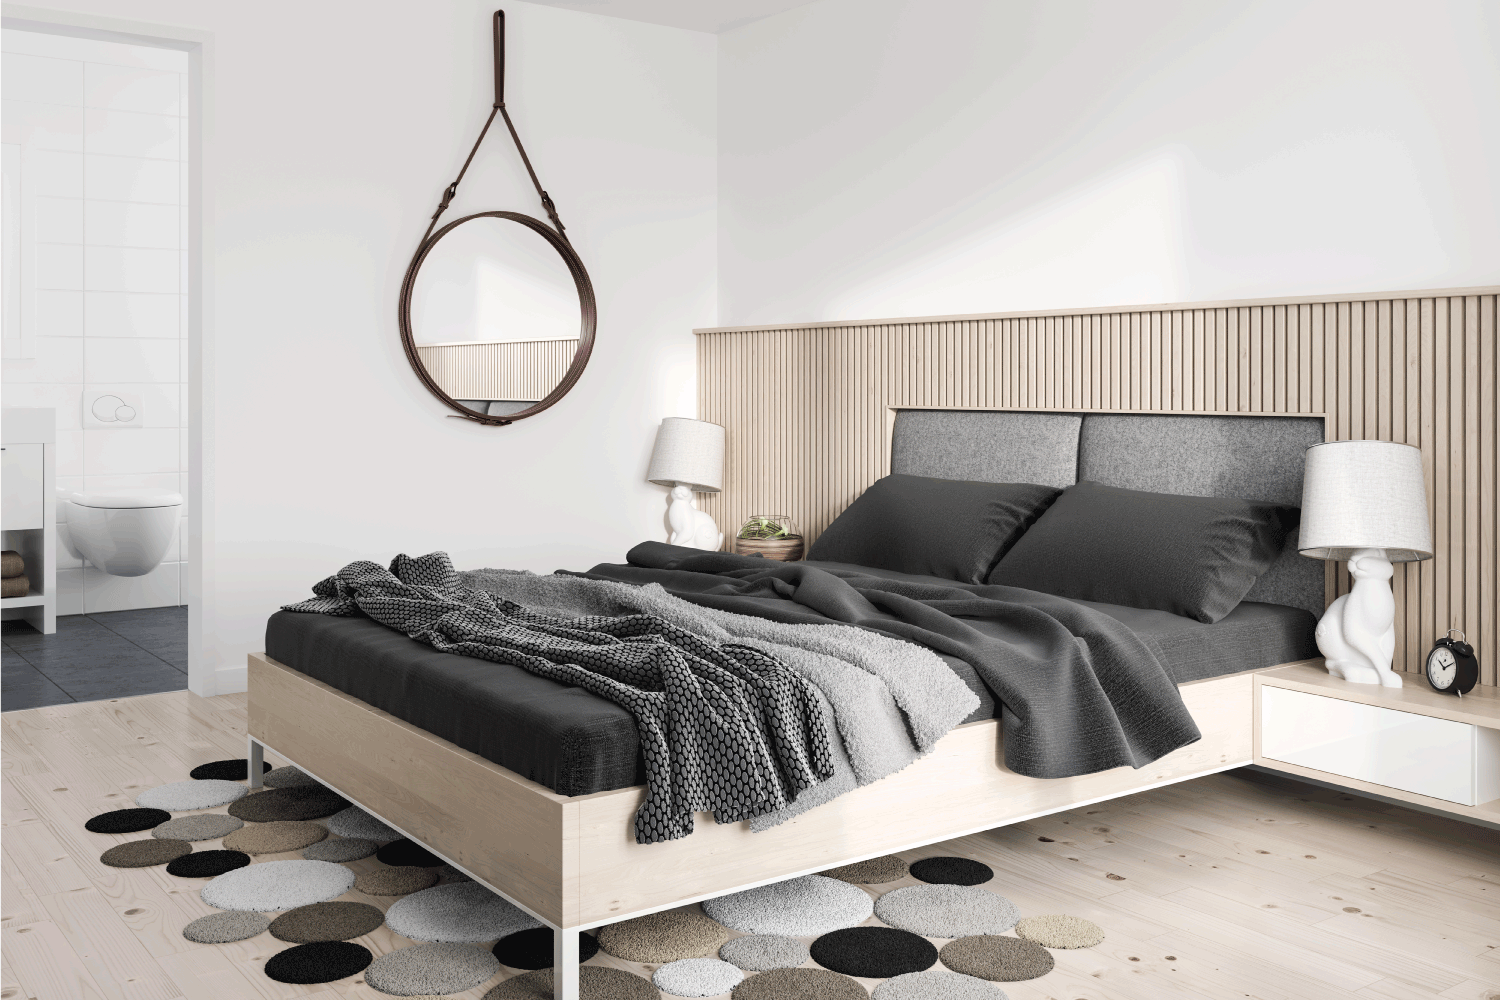 Minimalist modern bedroom. charcoal colored blankets and pillowcases